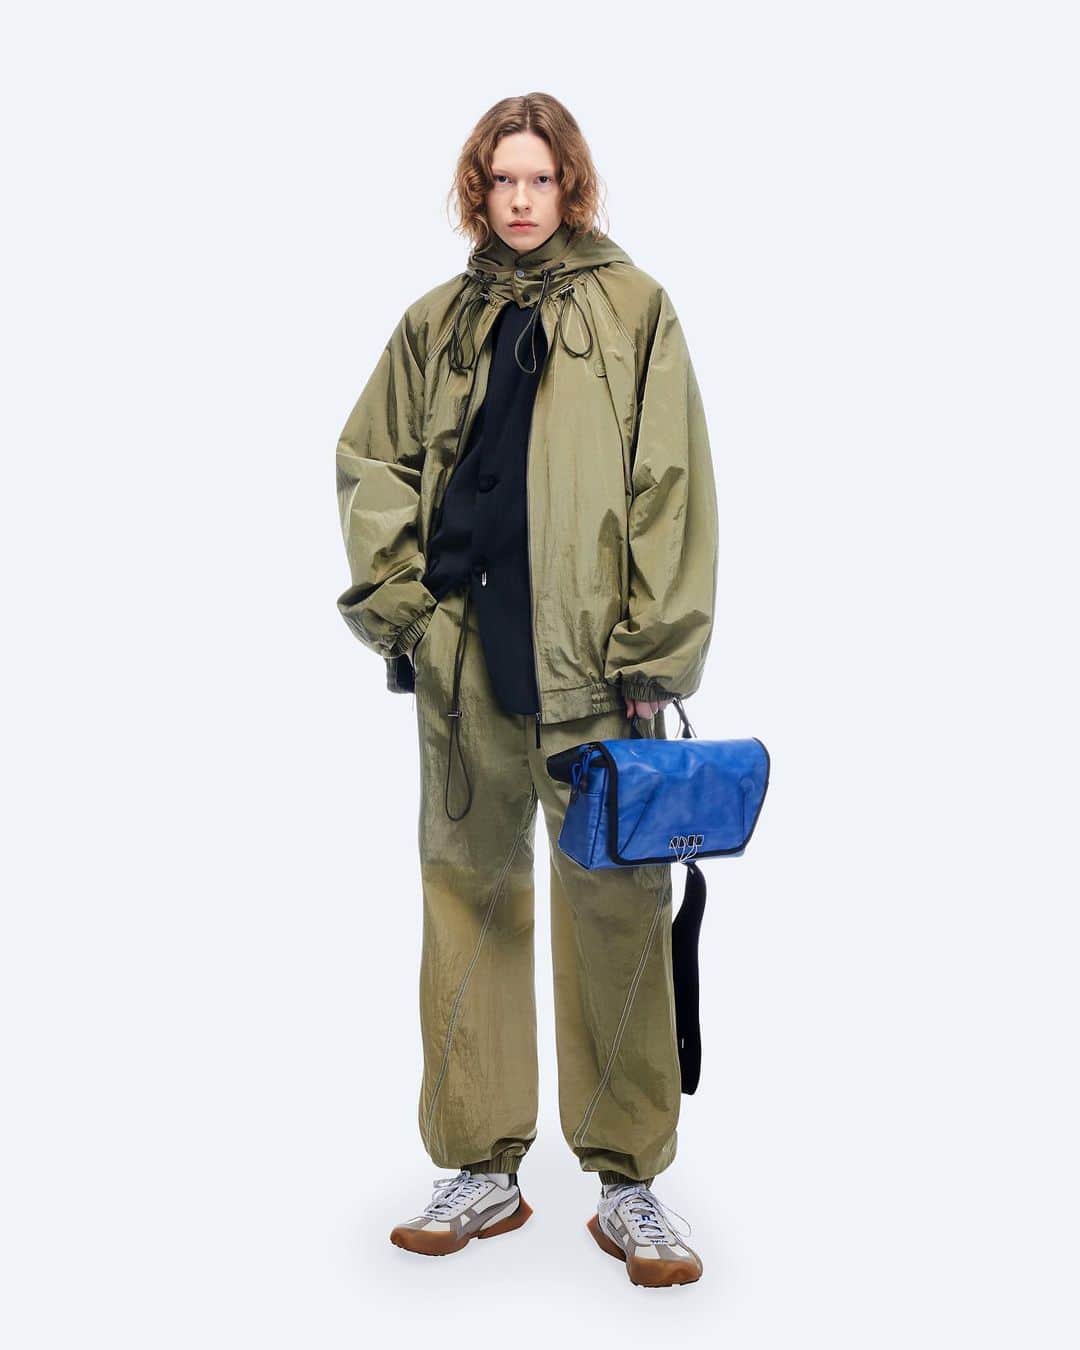 ADER errorさんのインスタグラム写真 - (ADER errorInstagram)「Presenting a new line-up from ADER Fall-Winter 2021 collection. The 'Un Nouveau Système' collection, which establishes a new order through distortion and transformation, proposes a new form with intentionally atypical silhouettes. Discover the lineup now at adererror.com - Track setups, hoodie jackets, knitwear, bags and buckets featuring ADER signature detail and line, tuck deformation are available.  아더 2021 가을-겨울 컬렉션의 시즌 컬렉션의 새로운 라인업을 선보입니다. 왜곡과 변형을 통해 새로운 질서를 정립하는 ‘Un Nouveau Système’ 컬렉션은 경계를 허물고 비정형의 실루엣을 통해 새로운 접근법을 시도합니다.  절개, 턱, 라인 변형 등의 아더의 시그니처 디테일이 가미 된 트랙 셋업, 후드 재킷, 니트웨어, 백 그리고 버킷햇을 지금 ADER 공식 온라인 스토어에서 만나보세요.  #ADERFW21 #UnNouveauSystème」12月30日 18時02分 - ader_error